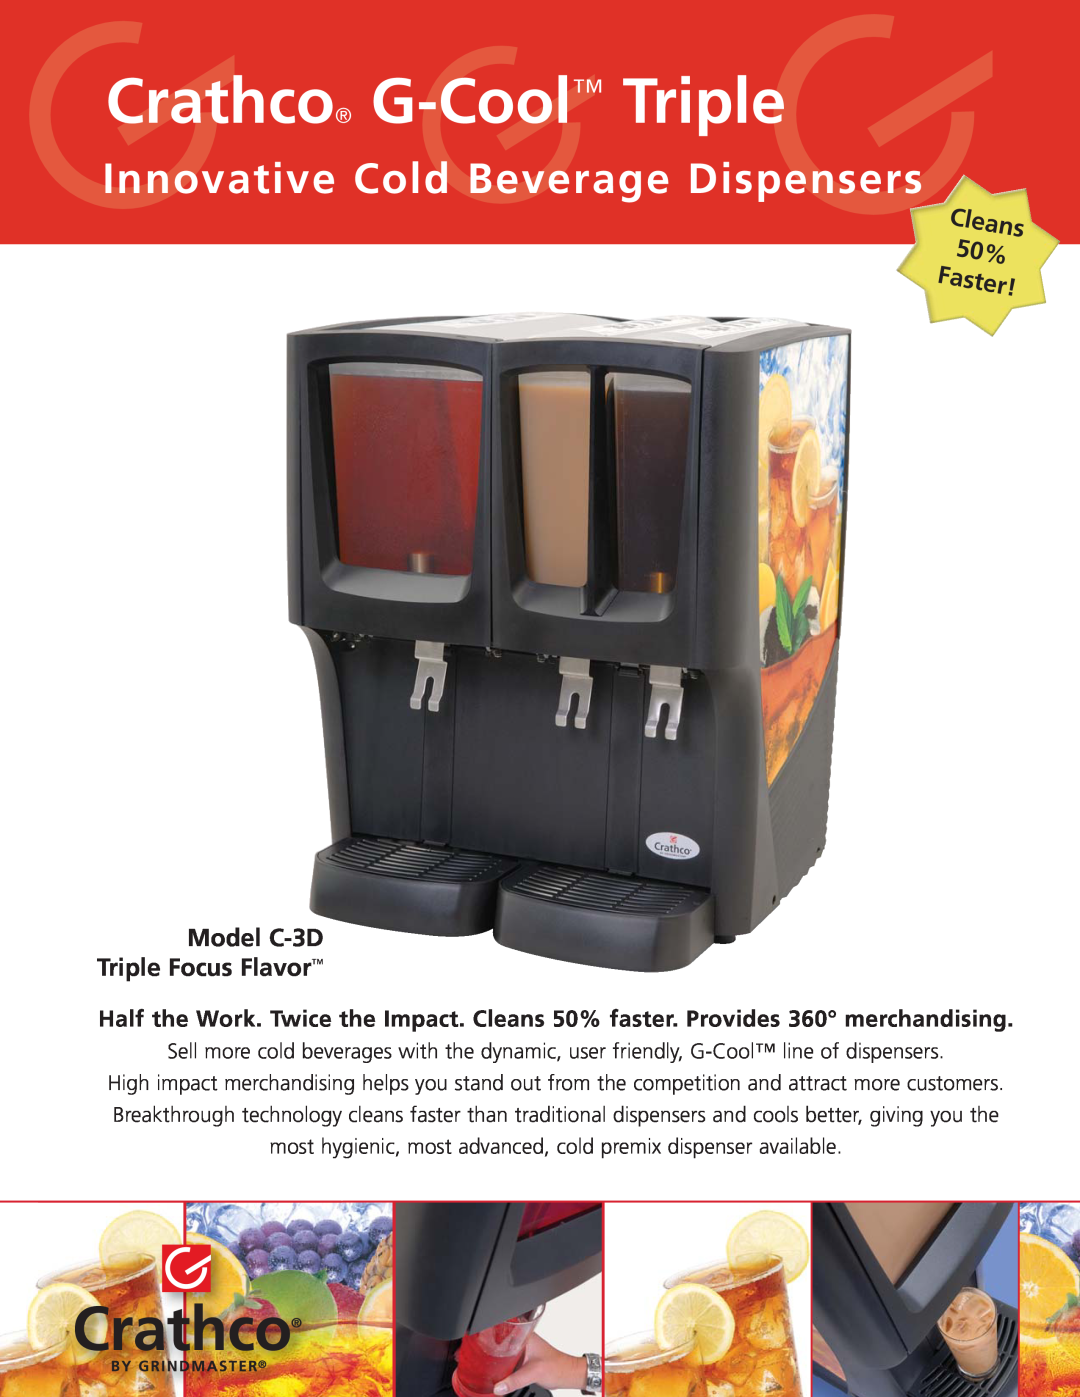 Grindmaster C-3D manual Crathco G-Cool Triple, Innovative Cold Beverage Dispensers, Cleans 50% Faster 